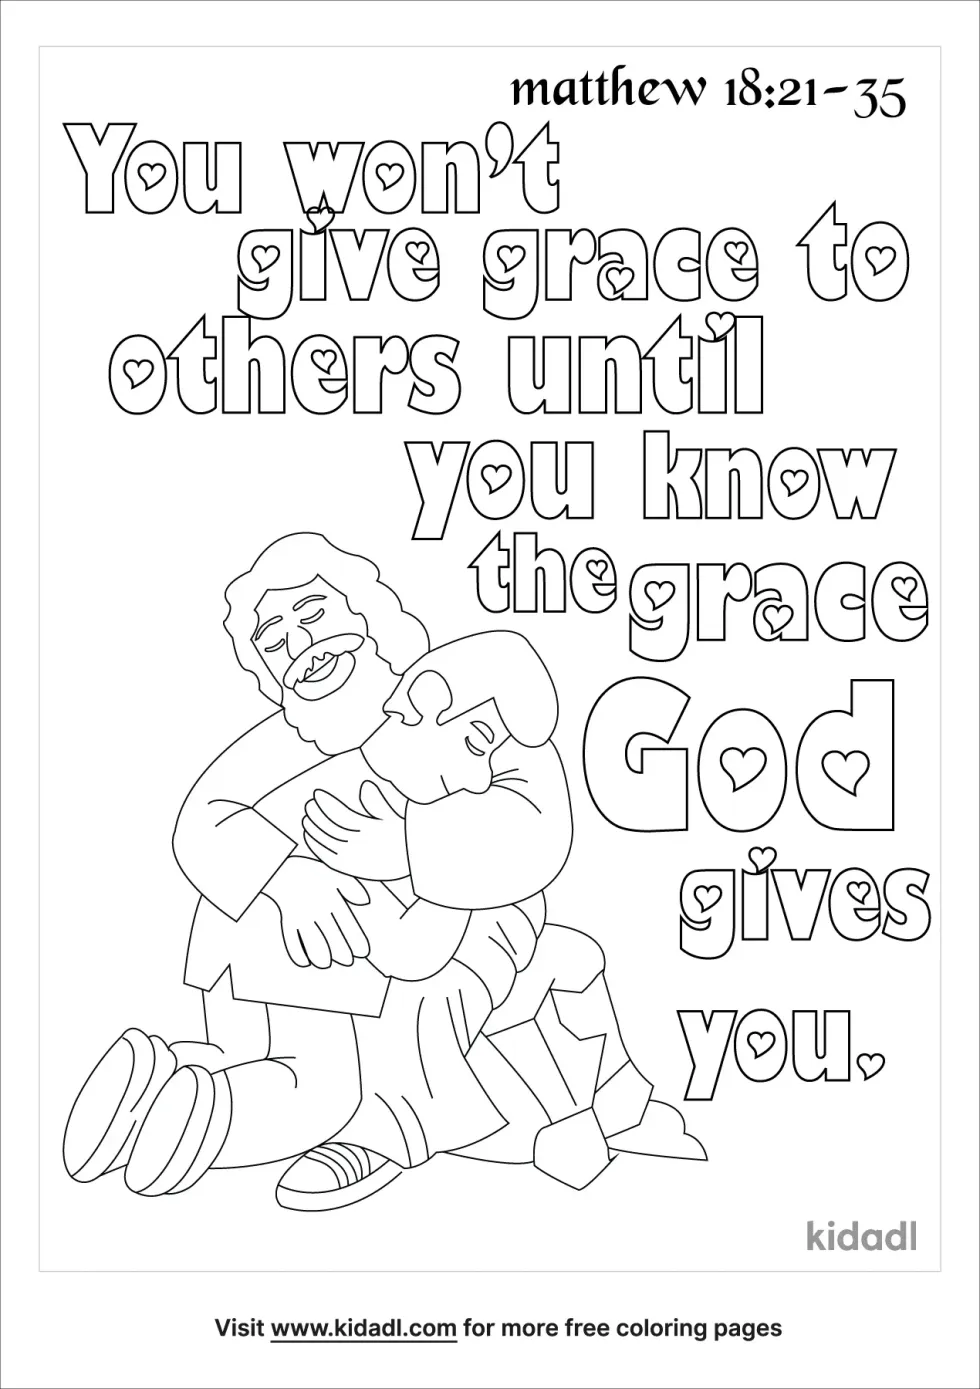 Matthew 18:21-35 Coloring Page